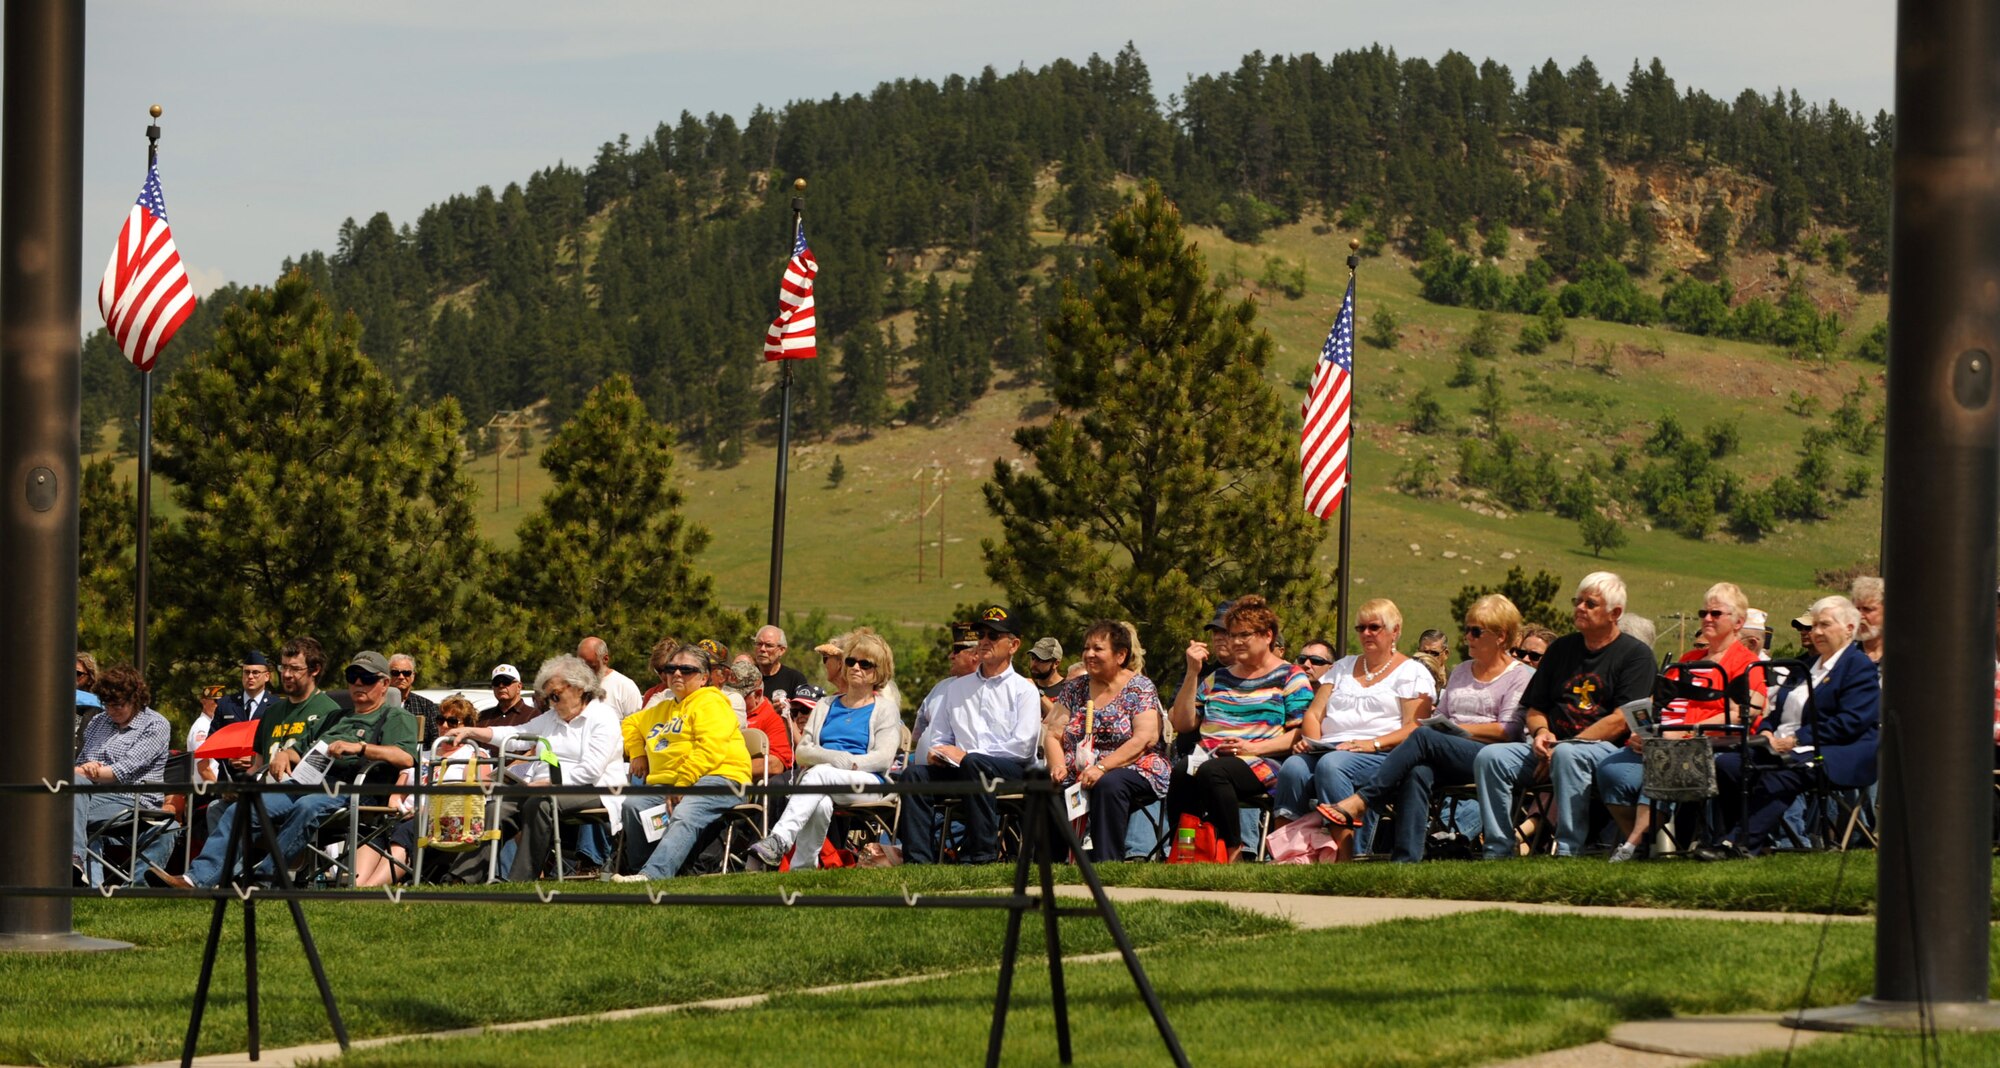 Members of the Black Hills community gather for a Memorial Day ceremony at Black Hills National Cemetery, Sturgis, S.D., May 30, 2016. Memorial Day, observed on the last Monday of May, is a federal holiday in the United States for remembering those who died while serving in the country’s armed forces. (U.S. Air Force photo by Airman 1st Class Denise M. Nevins/Released)